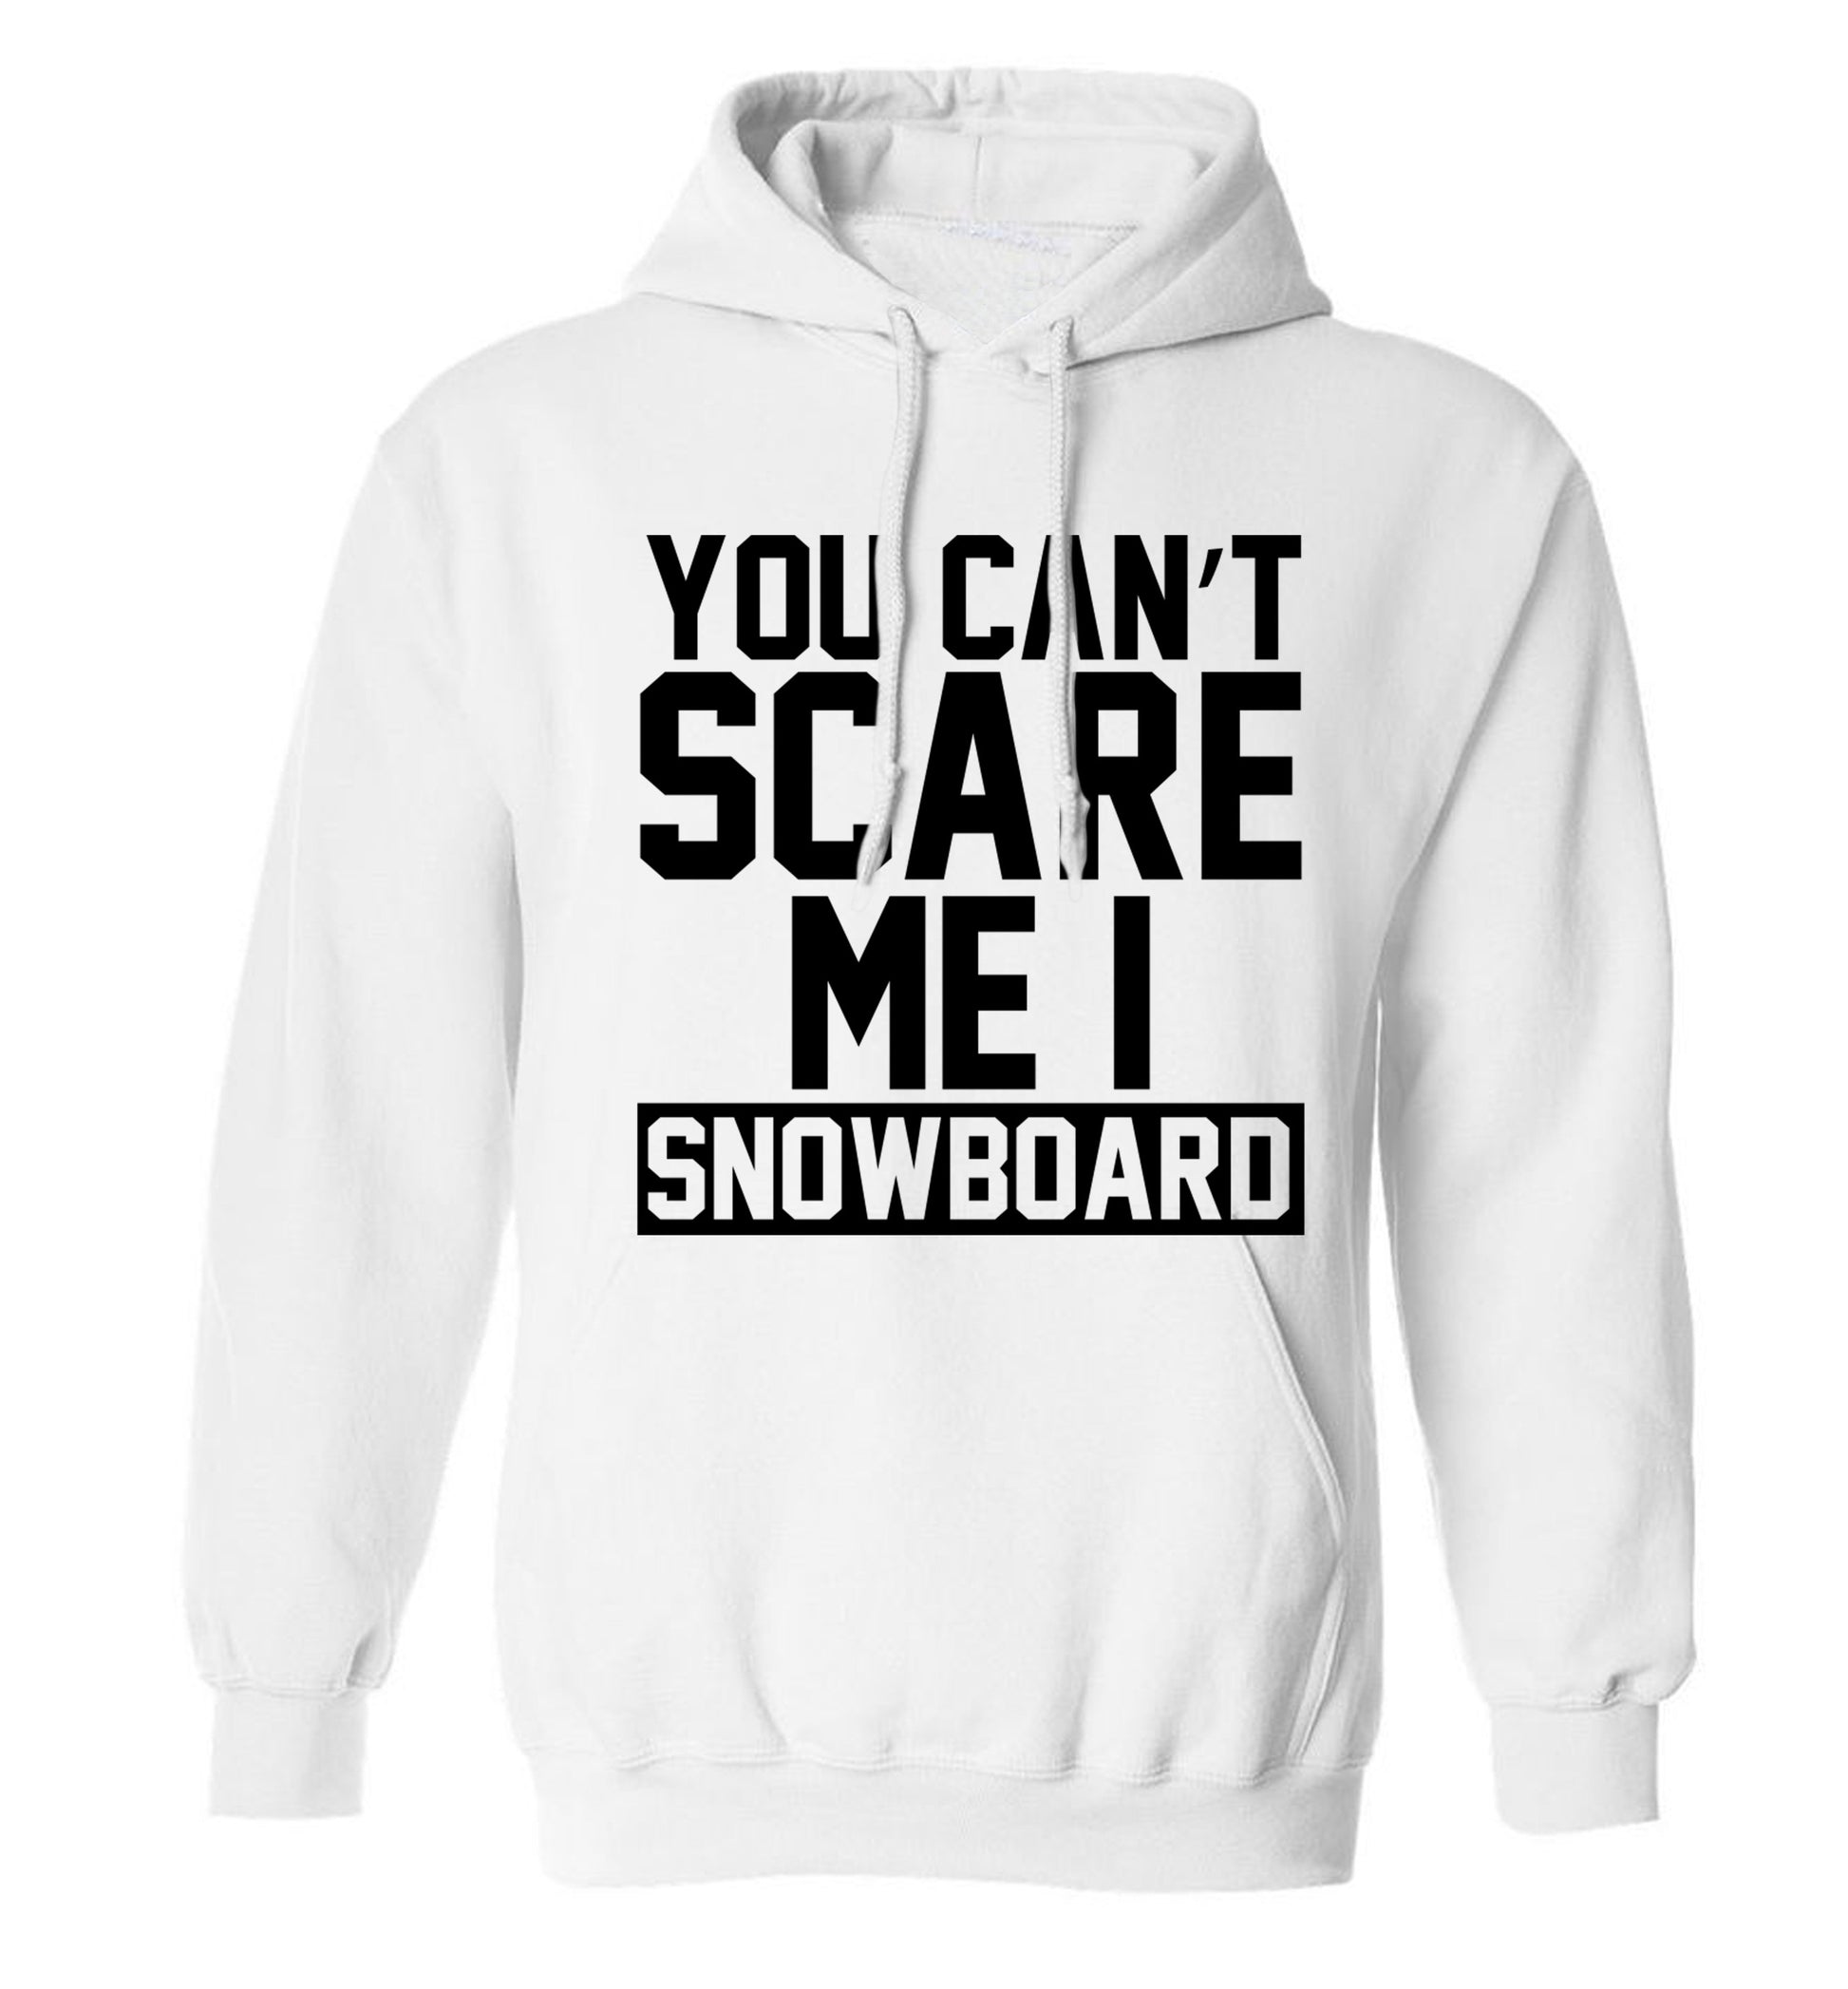 You can't scare me I snowboard adults unisex white hoodie 2XL